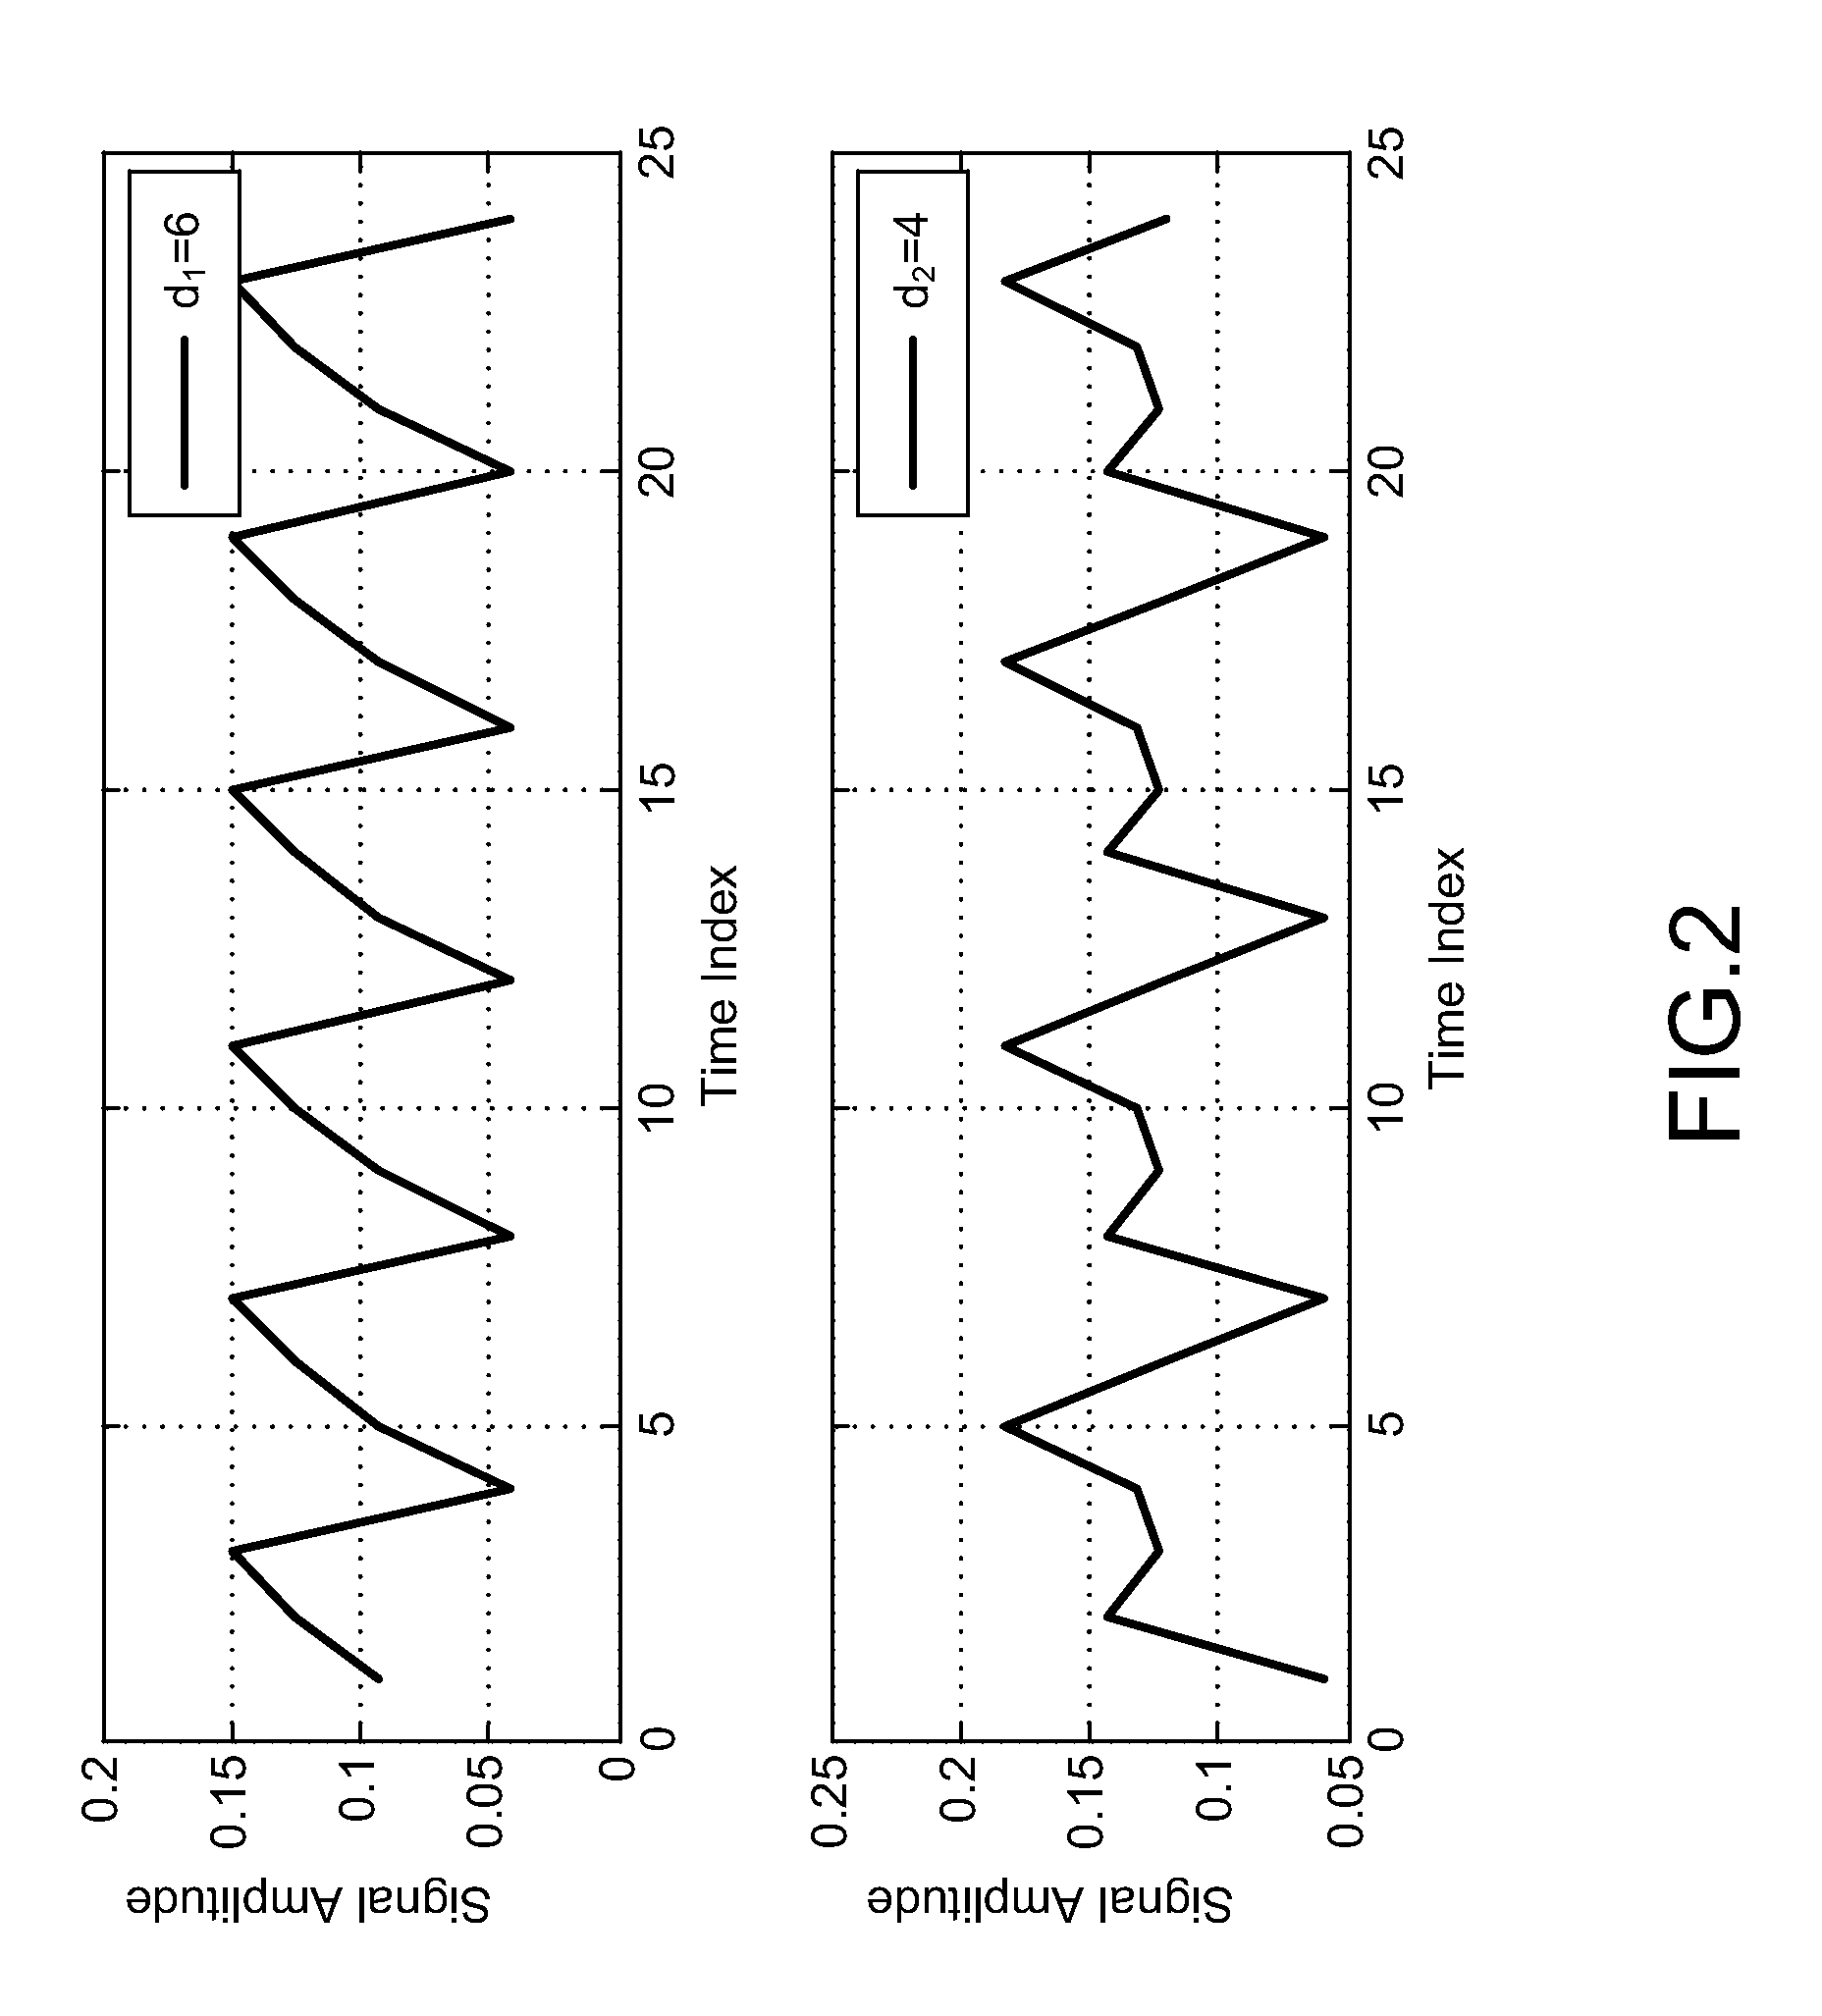 Apparatus for Cooperative MIMO OFDM Using Non-Data-Aided Timing Synchronization